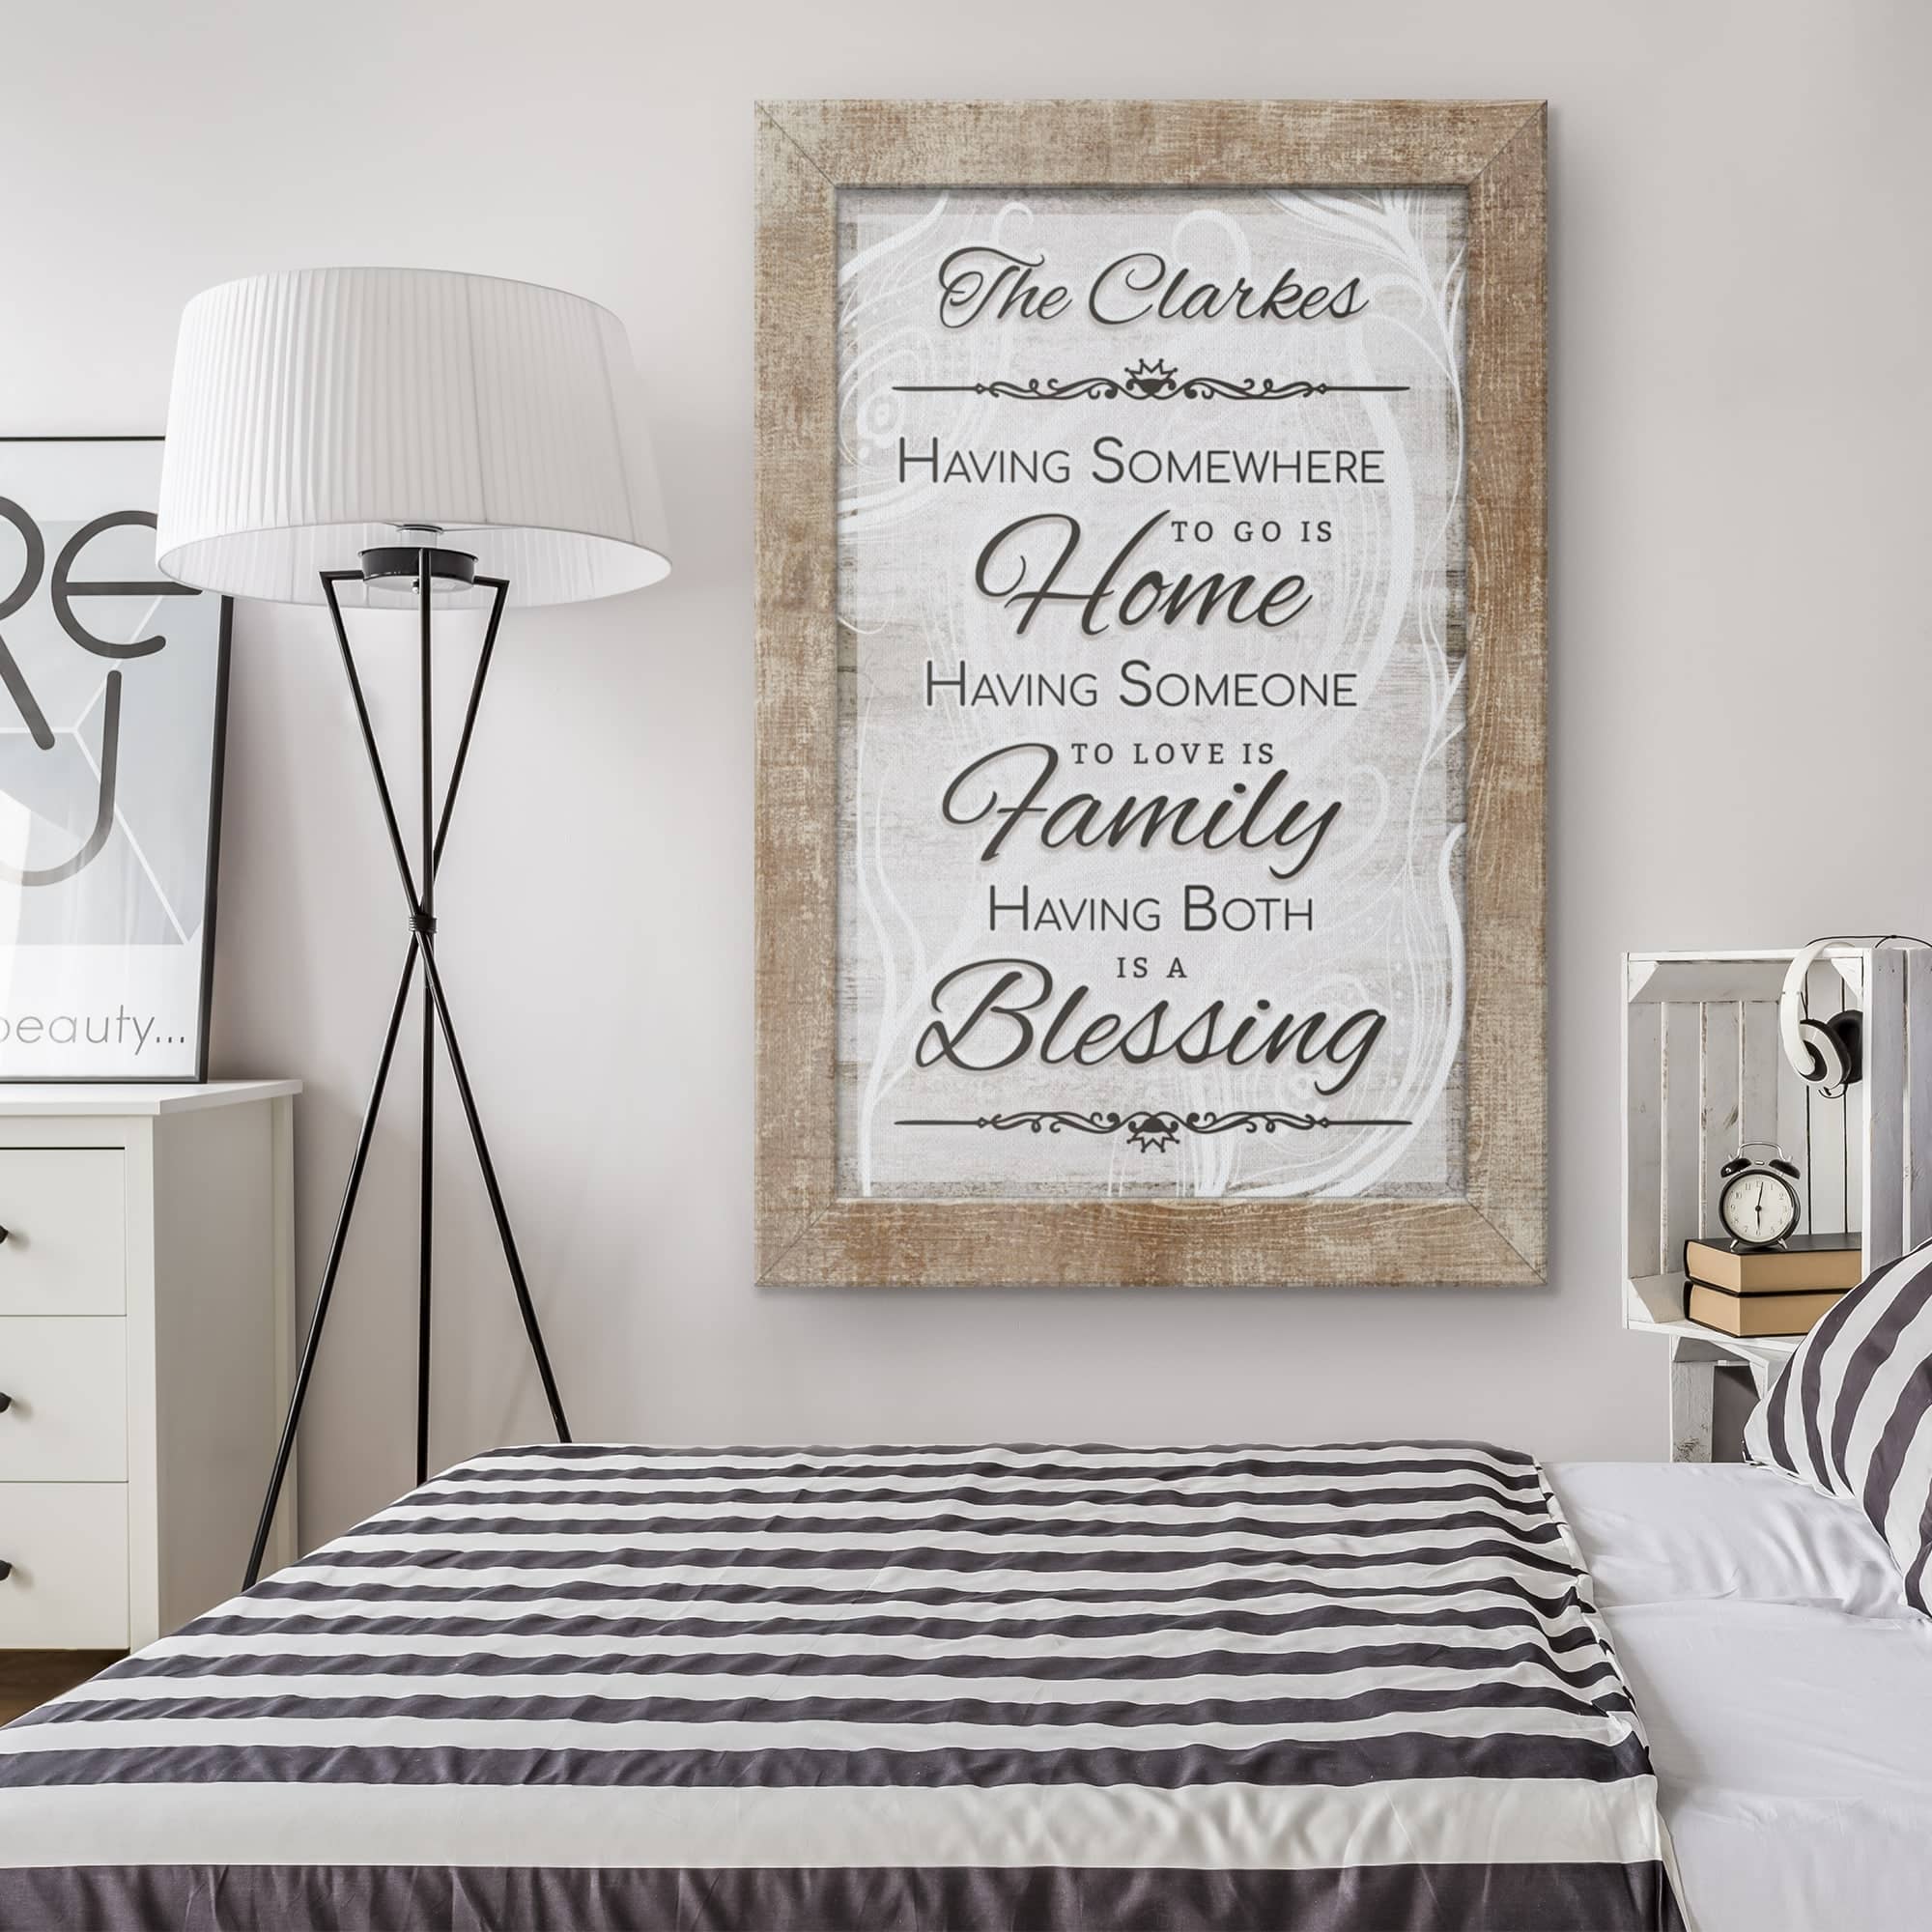 Personalized "Having Somewhere To Go Is Home" Premium Canvas Wall Art v2